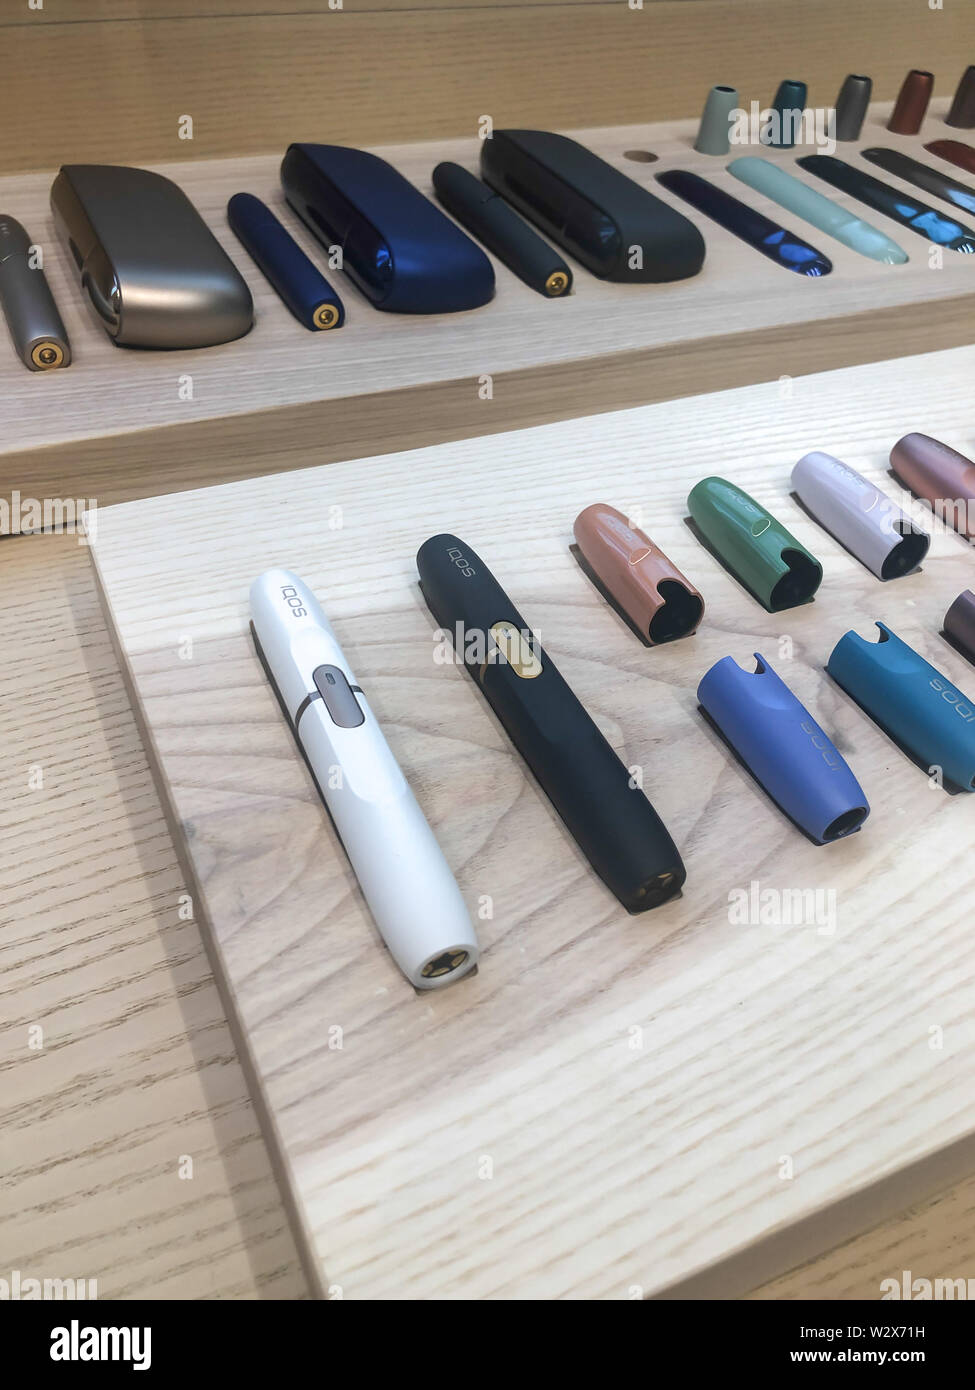 MOSCOW, RUSSIA - FEBRUARY 04, 2019: Iqos electronic cigarette philip morris in Iqos store Stock Photo